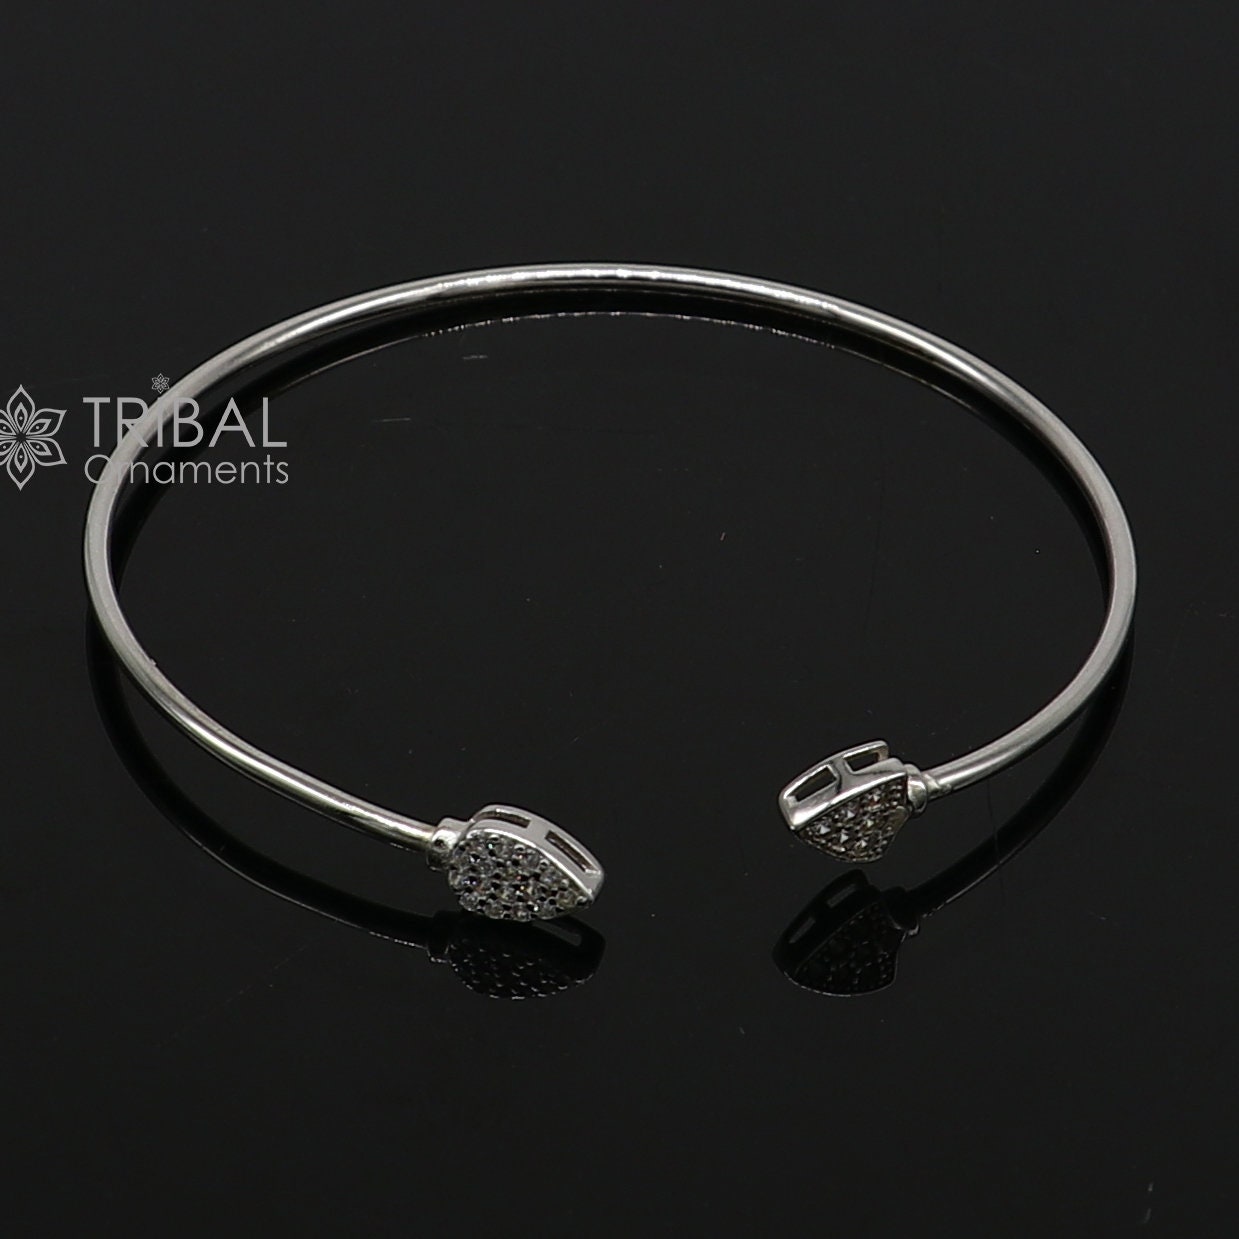 925 sterling silver handmade amazing trendy stylish girl's cuff kada bracelet, best delicate unique light weight gifting for girls cuff173 - TRIBAL ORNAMENTS